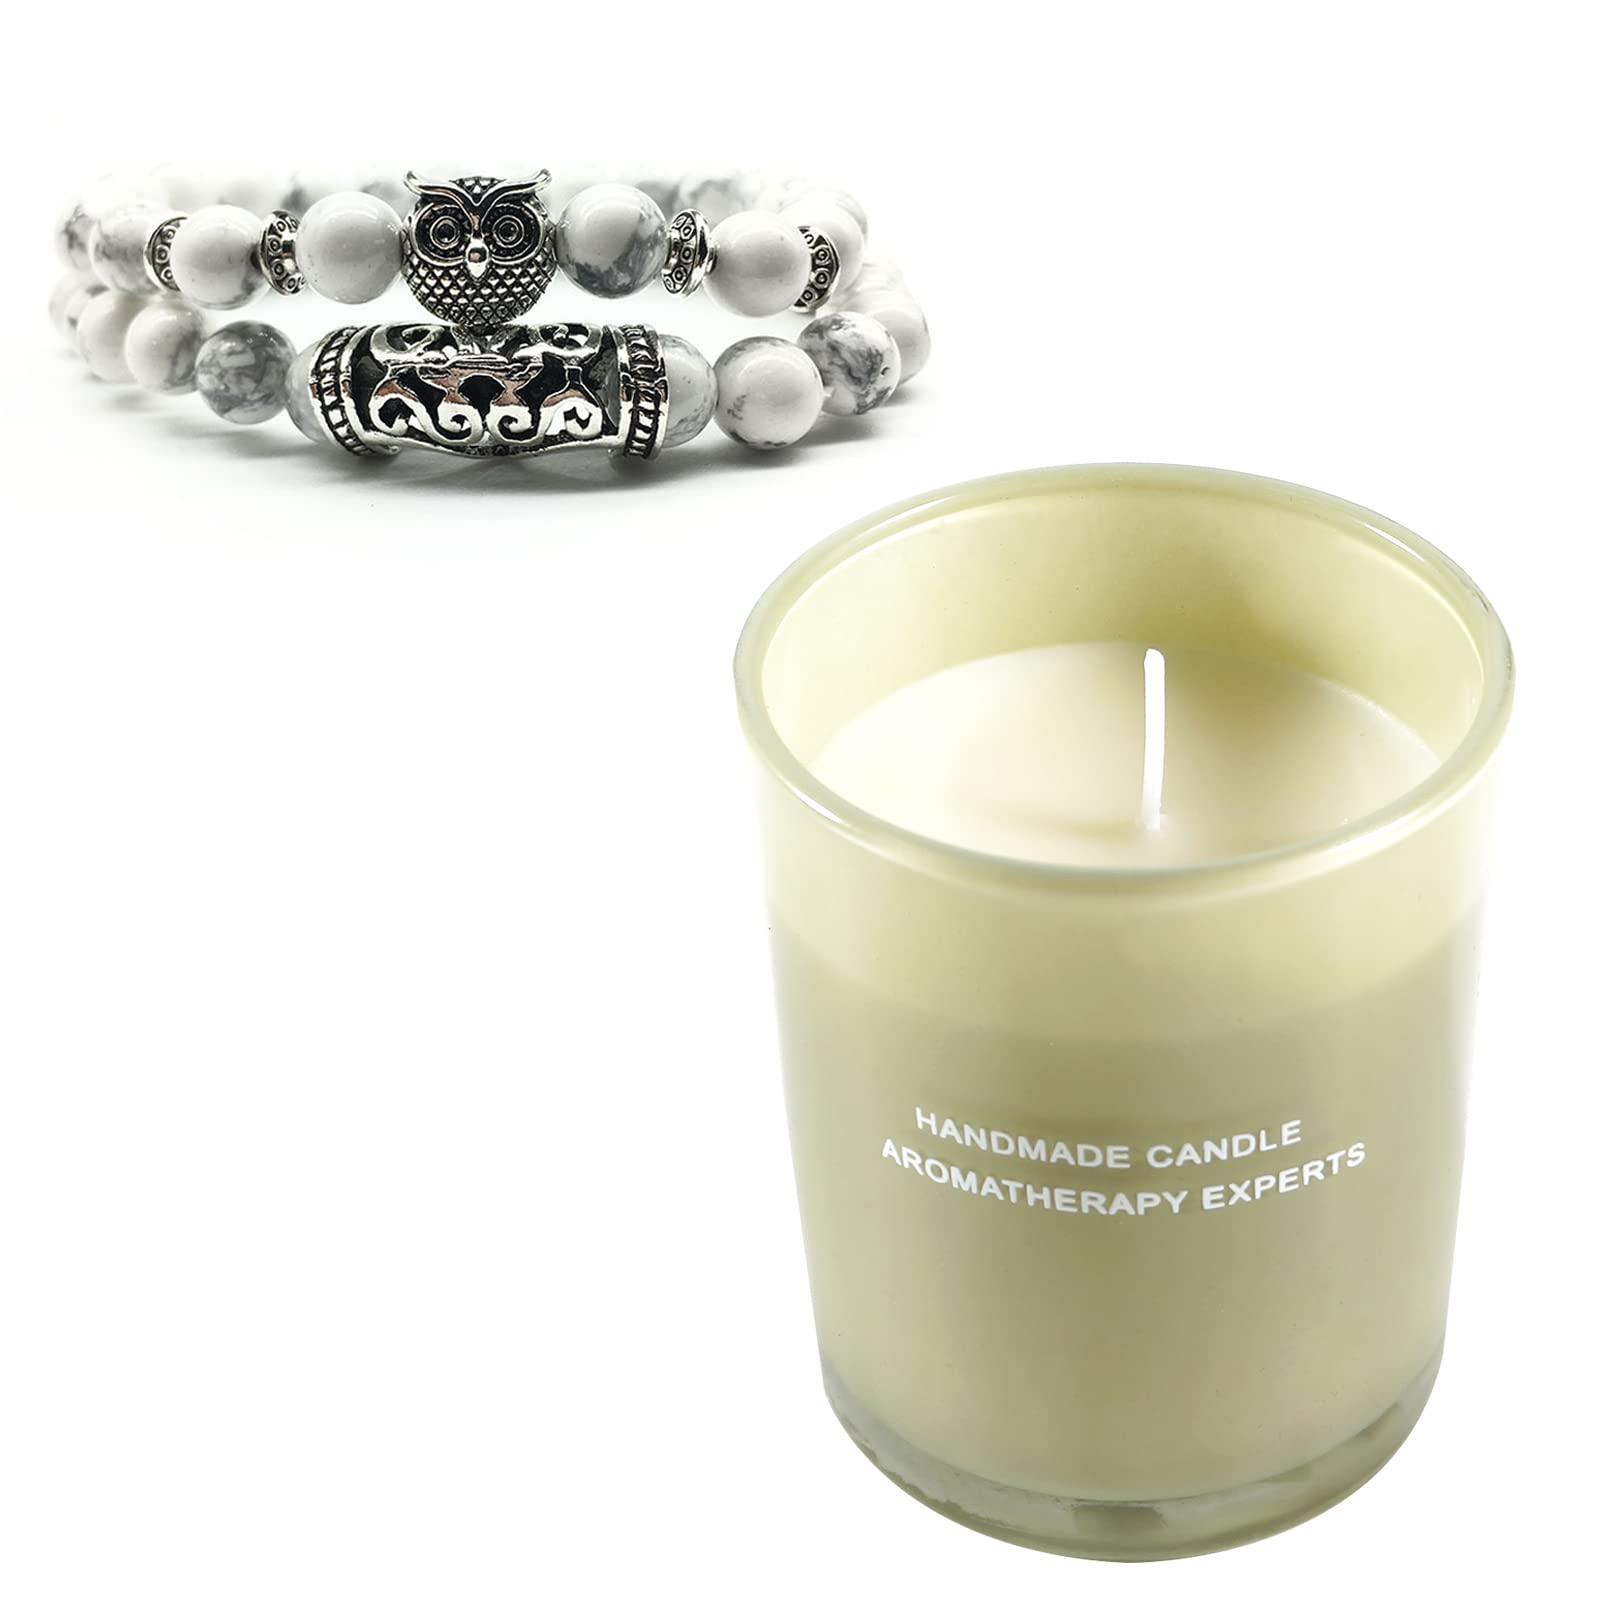 Soulnioi Scented Candle Soy Candle Aromatherapy Candle with 35 Hours Burn Time for Home Fragrance Stress Relief (Cheeses and Strawberries Scent), 2pc White Turquoise Stone Round Bead Bracelet